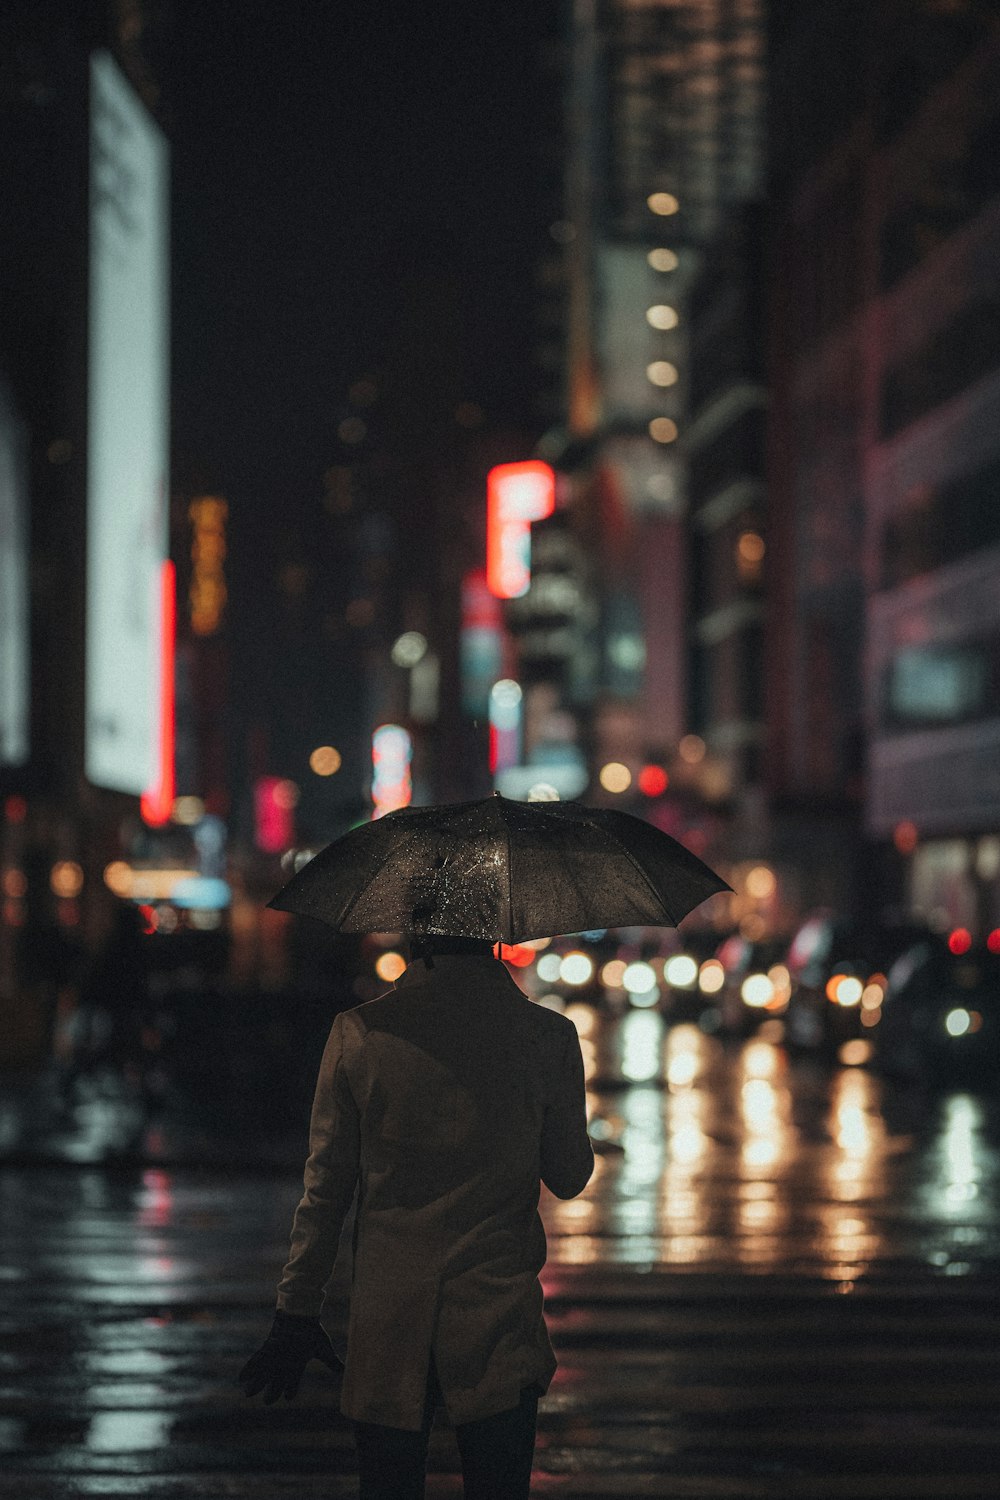 person in black coat holding umbrella walking on street during night time